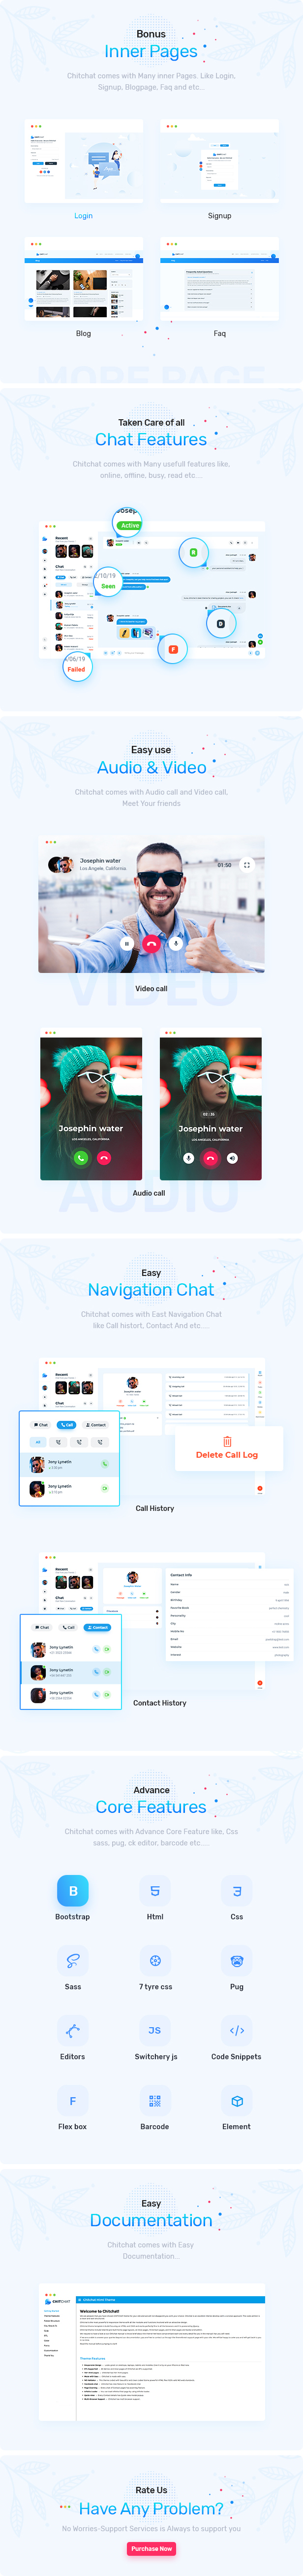 Chitchat - Perfect Chat and Discussion HTML Template